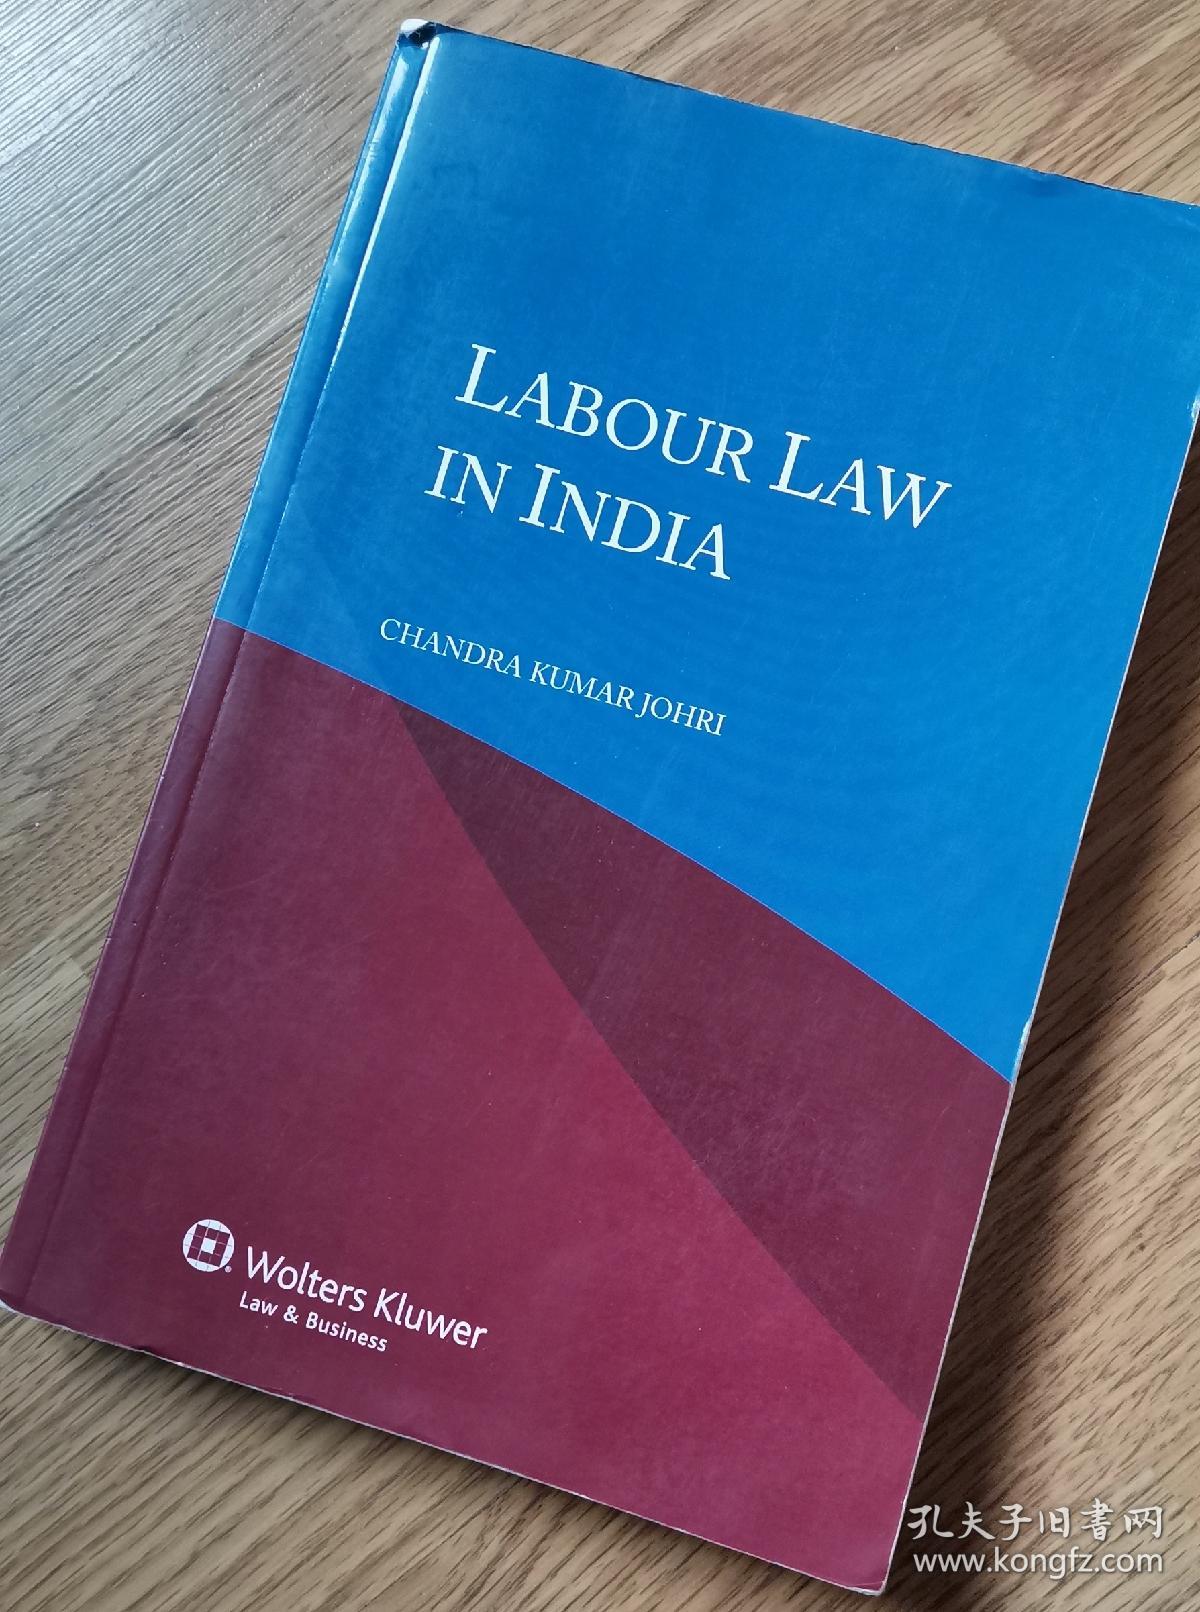 Labour Law In India 《印度劳工法》